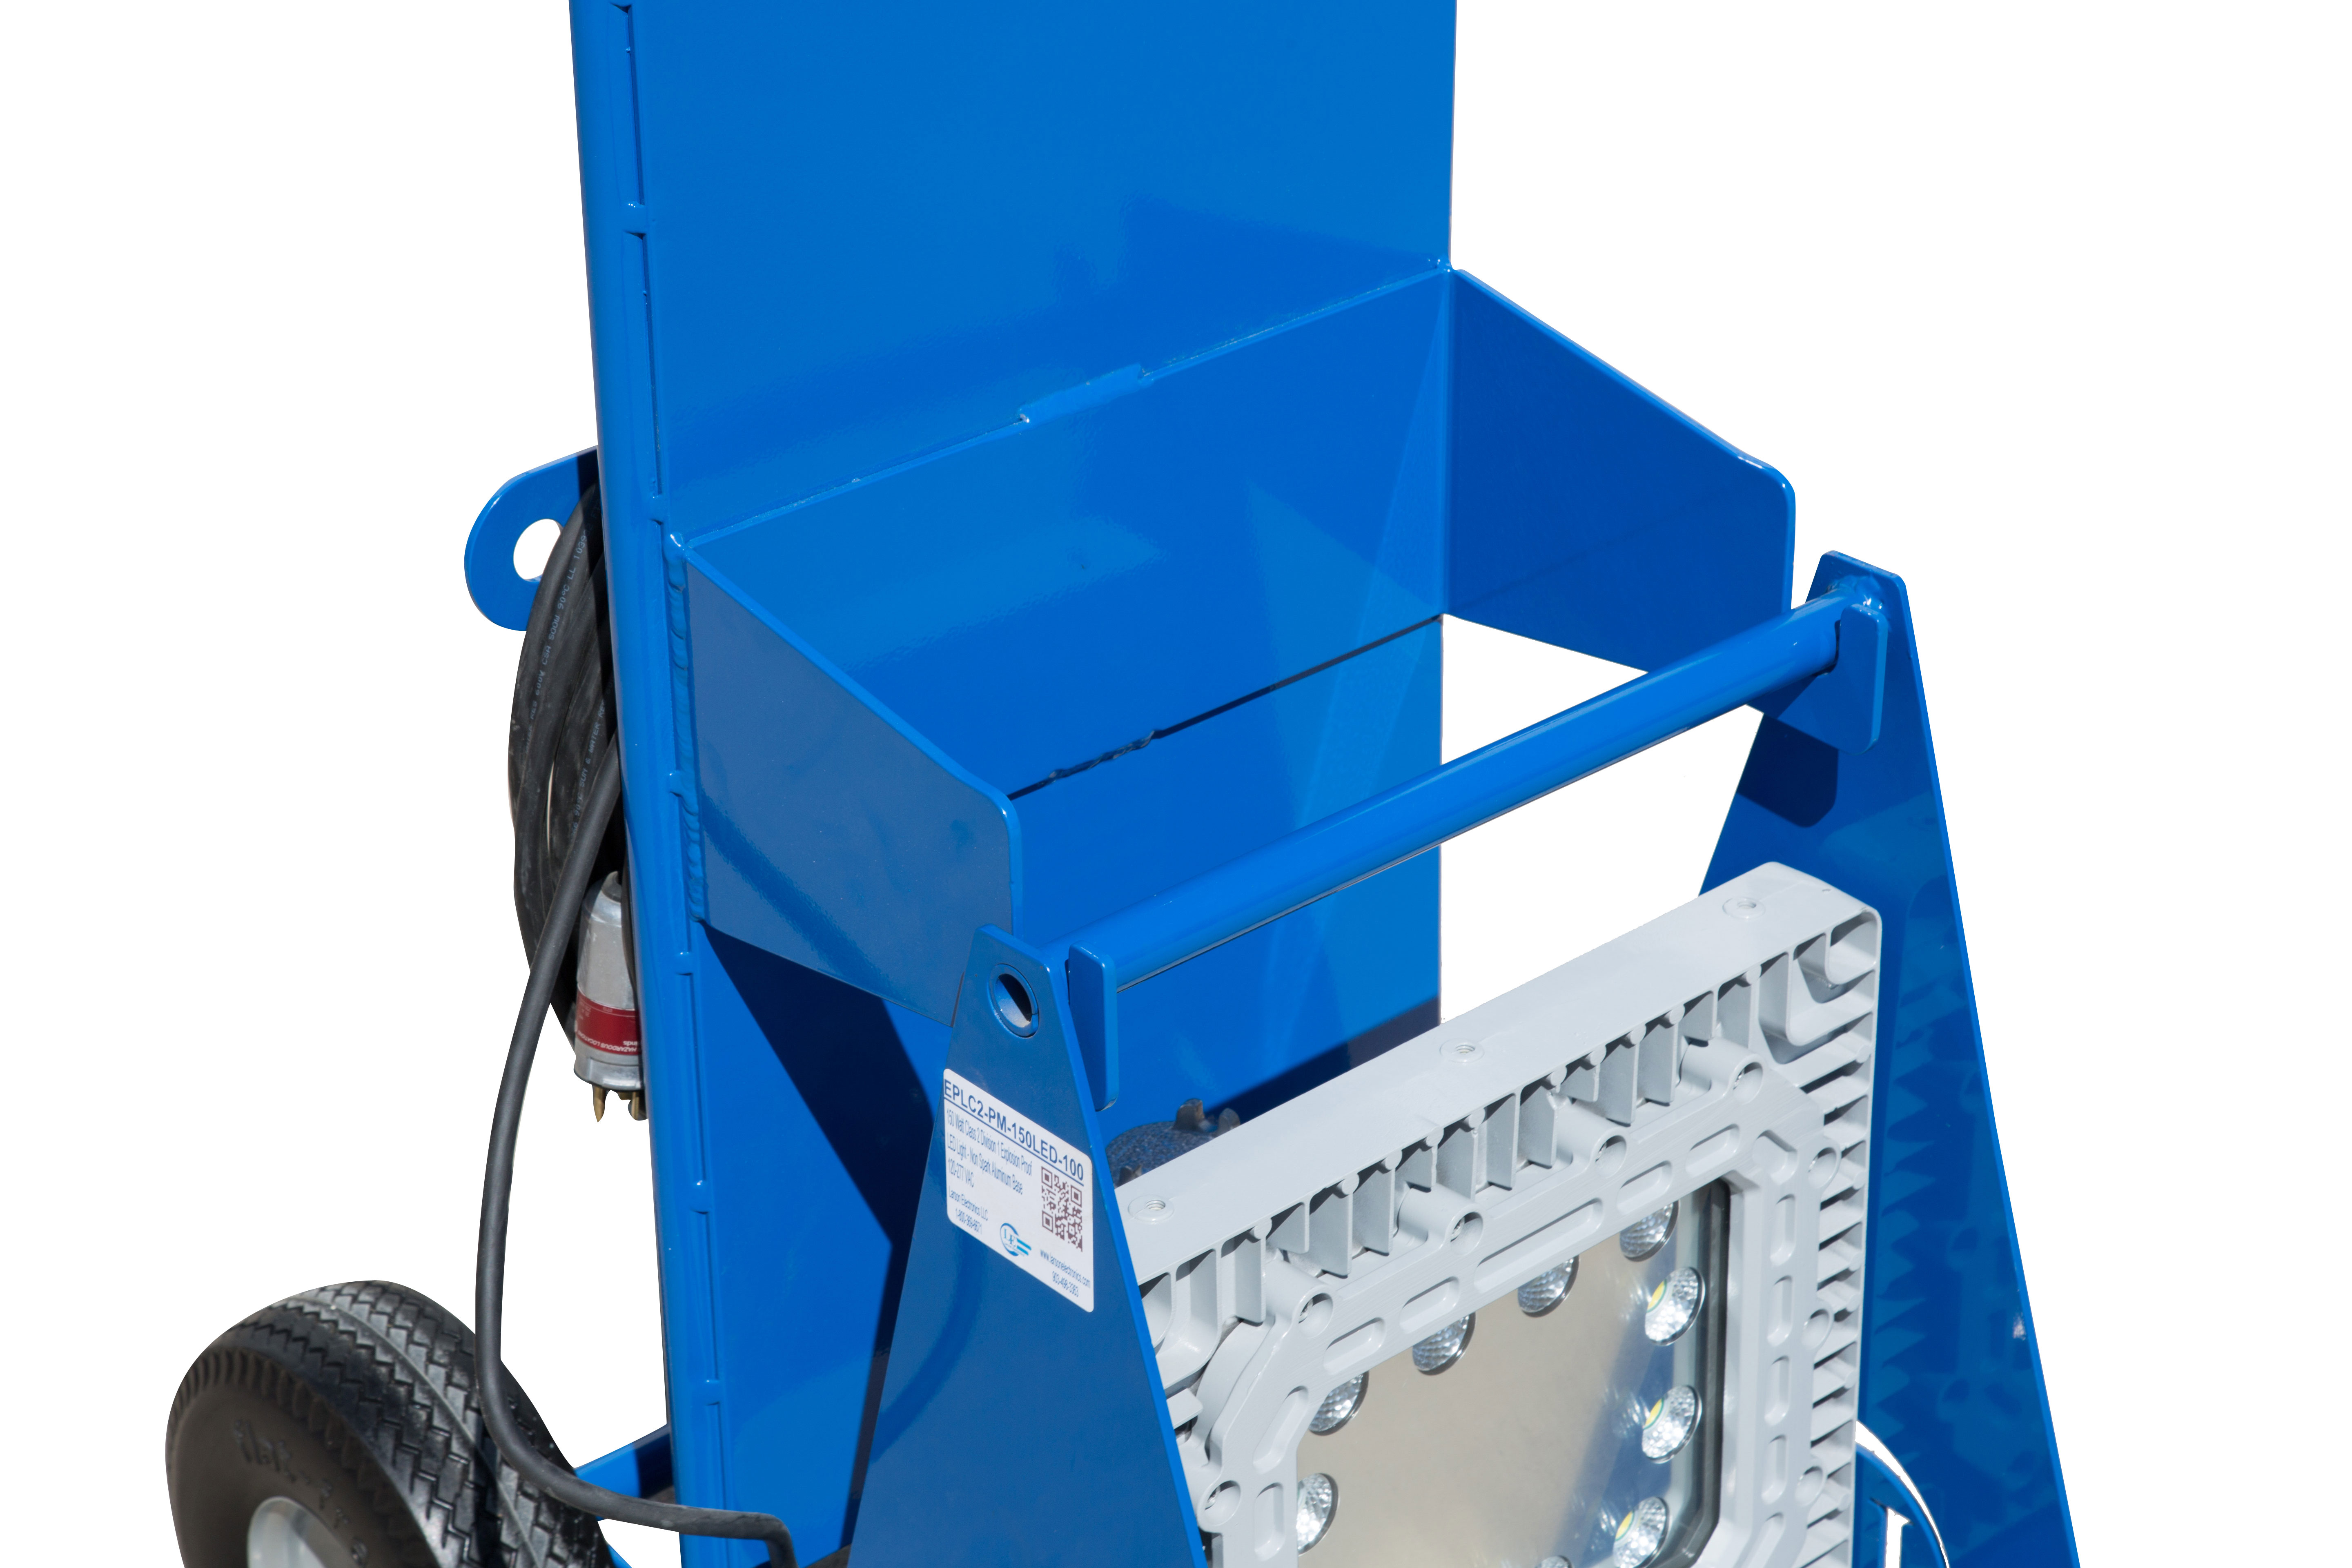 Class 1 Division 1 LED Work Light on Portable A-Frame with Dolly Cart